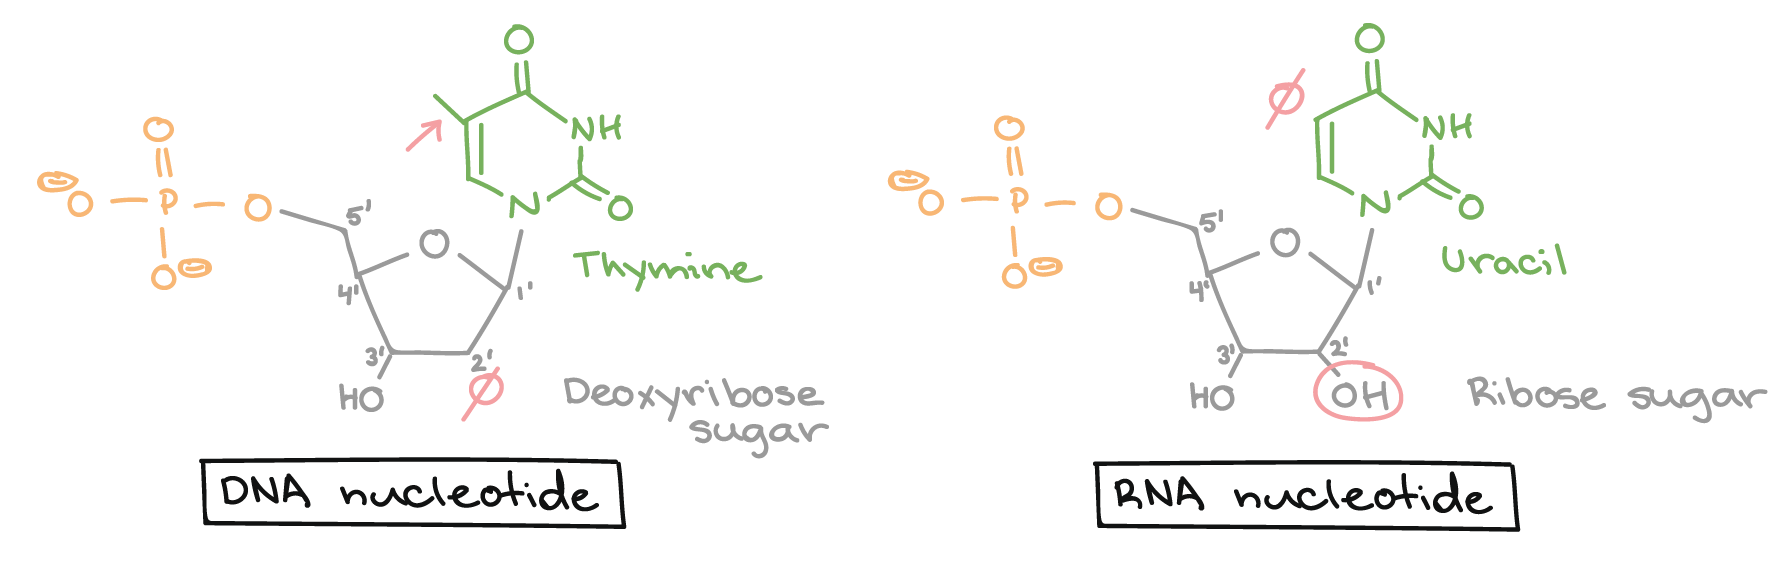 DNA nucleotide: lacks a hydroxyl group on the 2' carbon of the sugar (i.e., sugar is deoxyribose). Bears a thymine base that has a methyl group attached to its ring.

RNA nucleotide: has a hydroxyl group on the 2' carbon of the sugar (i.e., sugar is ribose). Bears a uracil base that is very similar in structure to thymine, but does not have a methyl group attached to the ring.